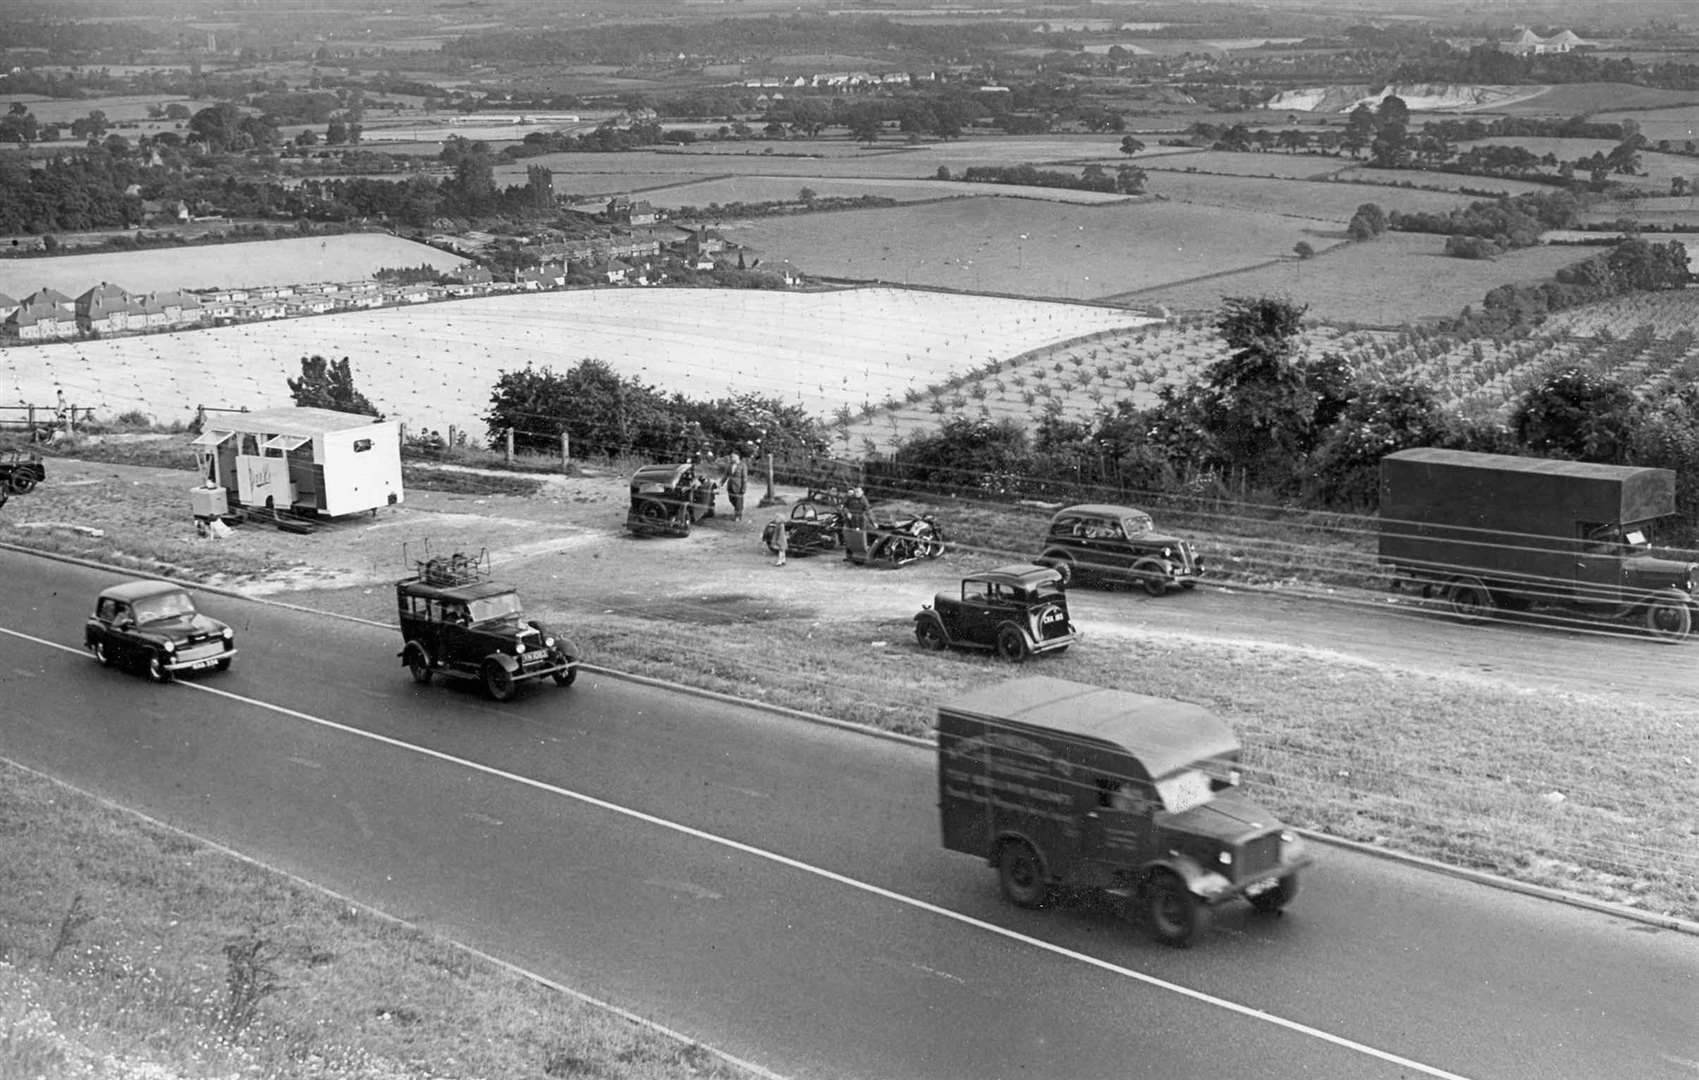 A different time: Traffic on the A20 in the 1950s